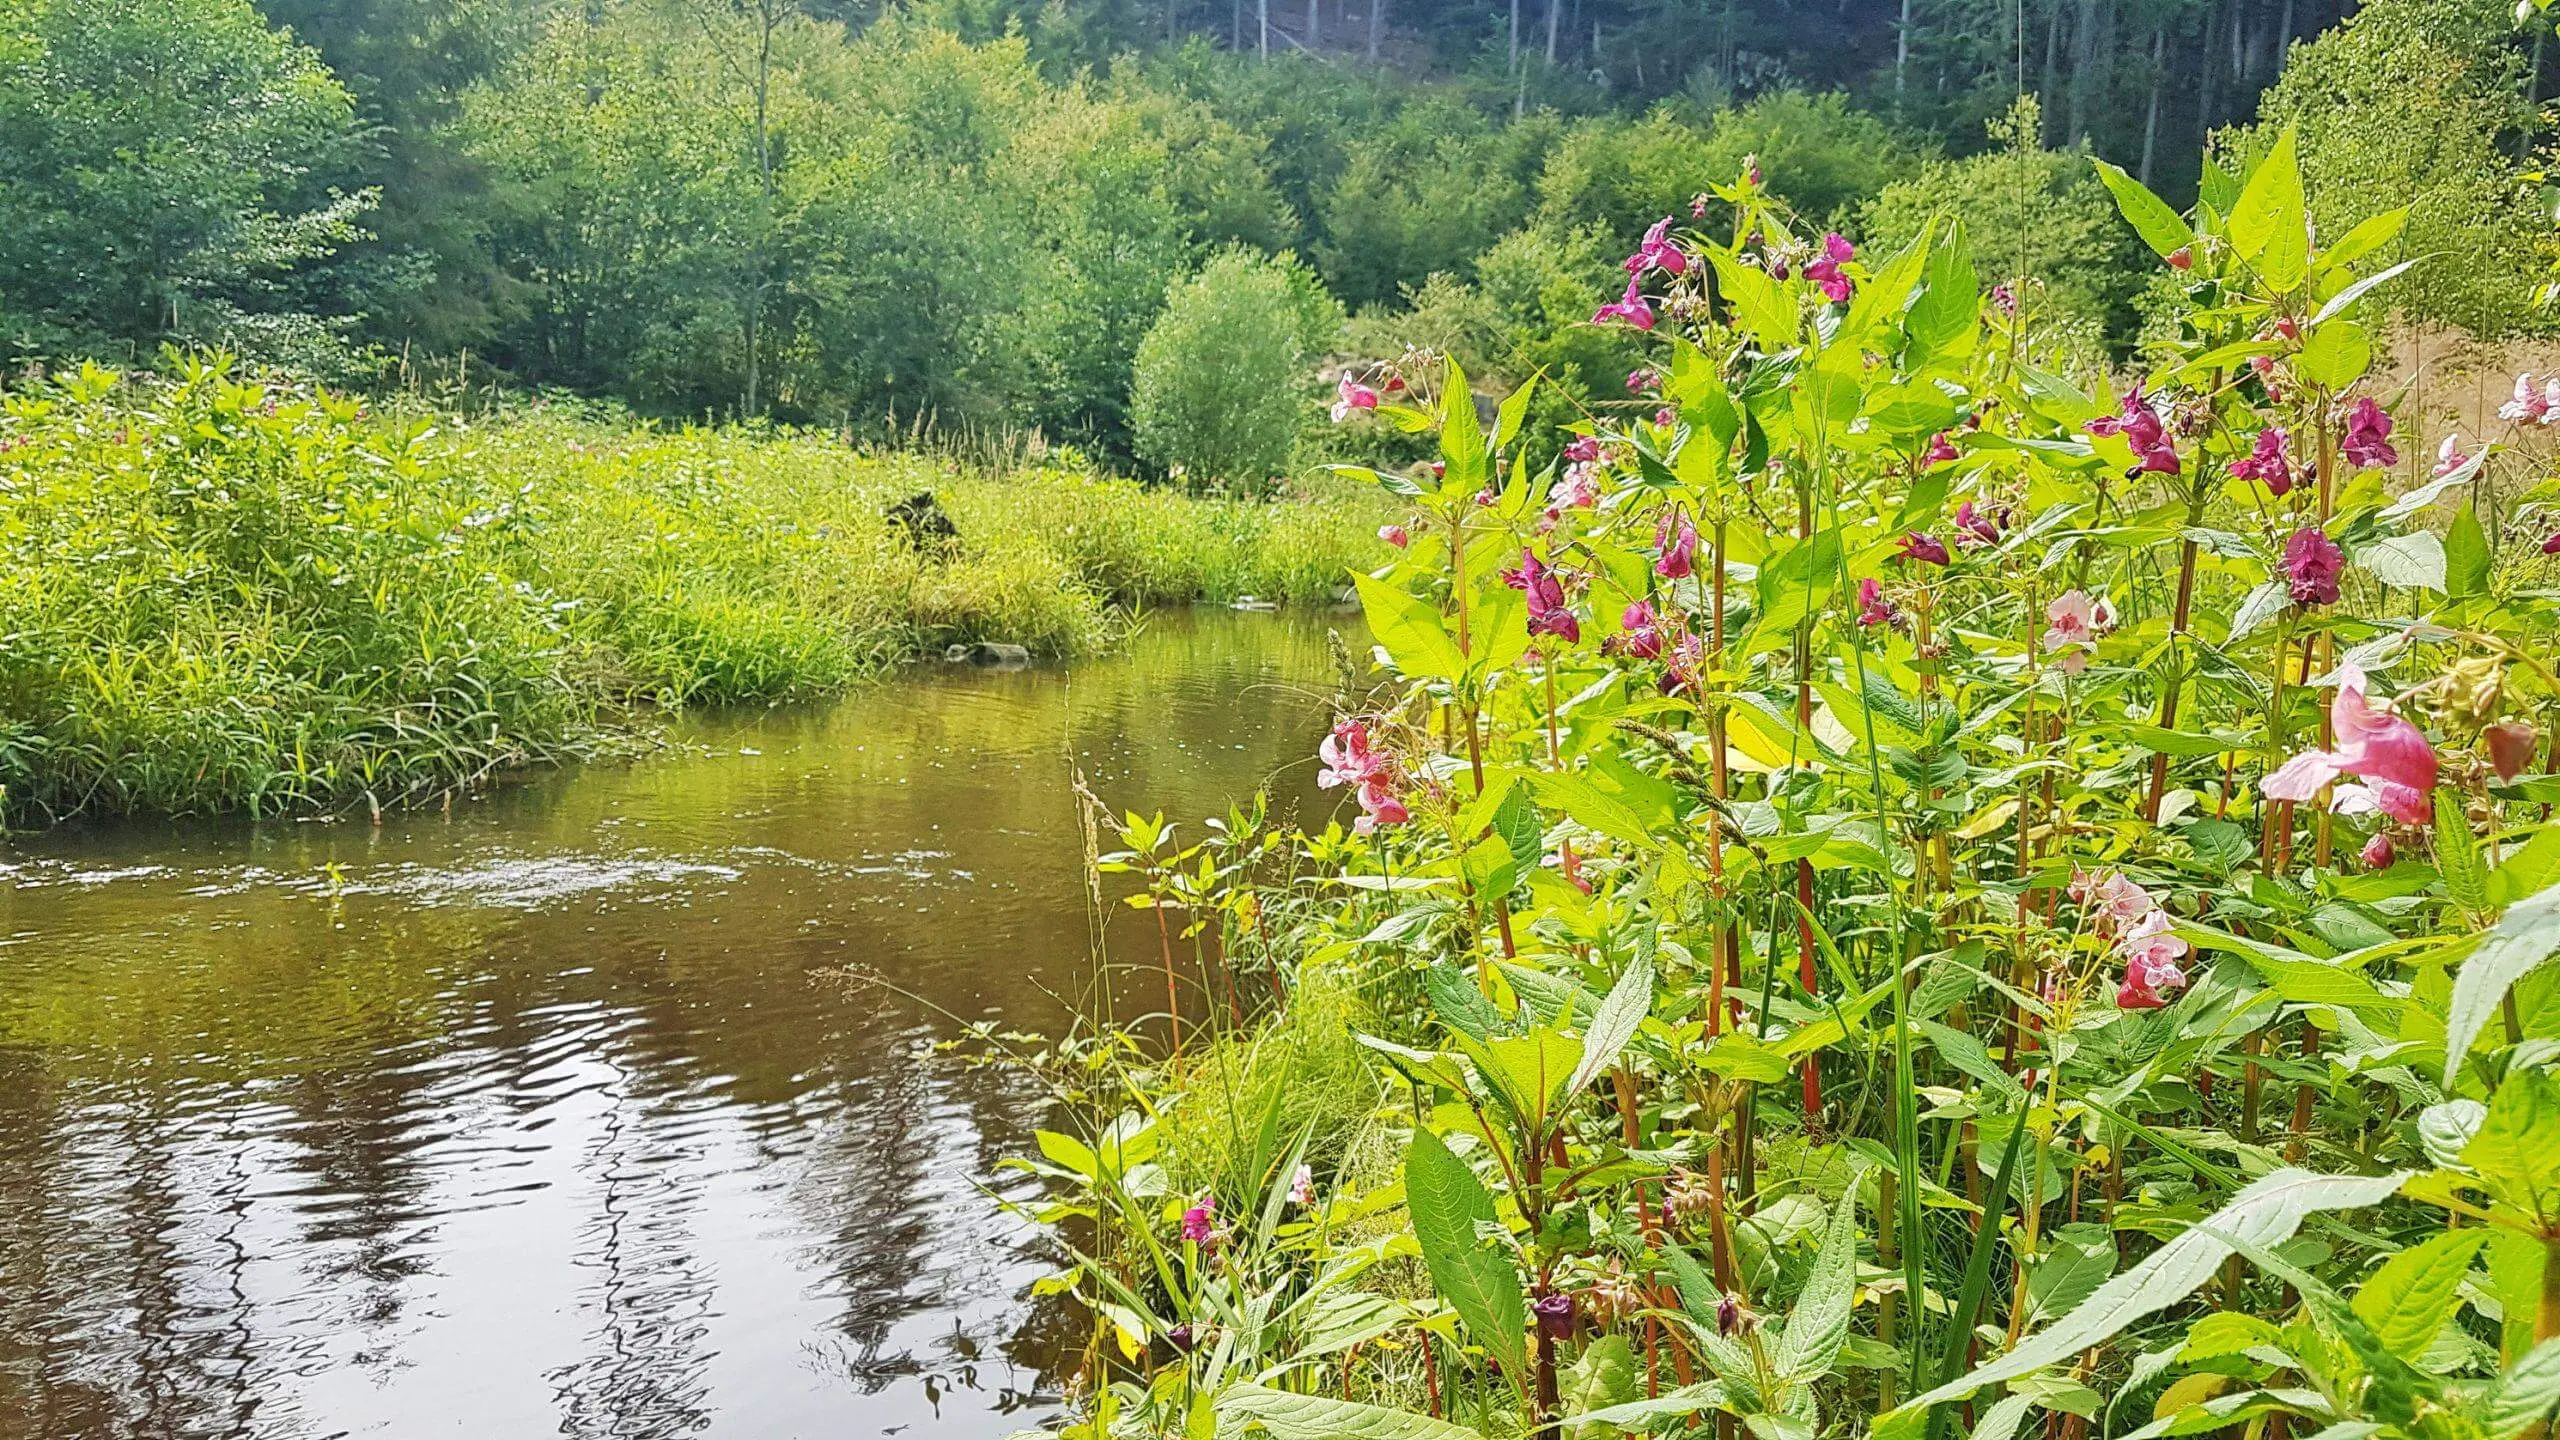 Himalayan Balsam or Impatiens glandulifera growing excessively on a river bank